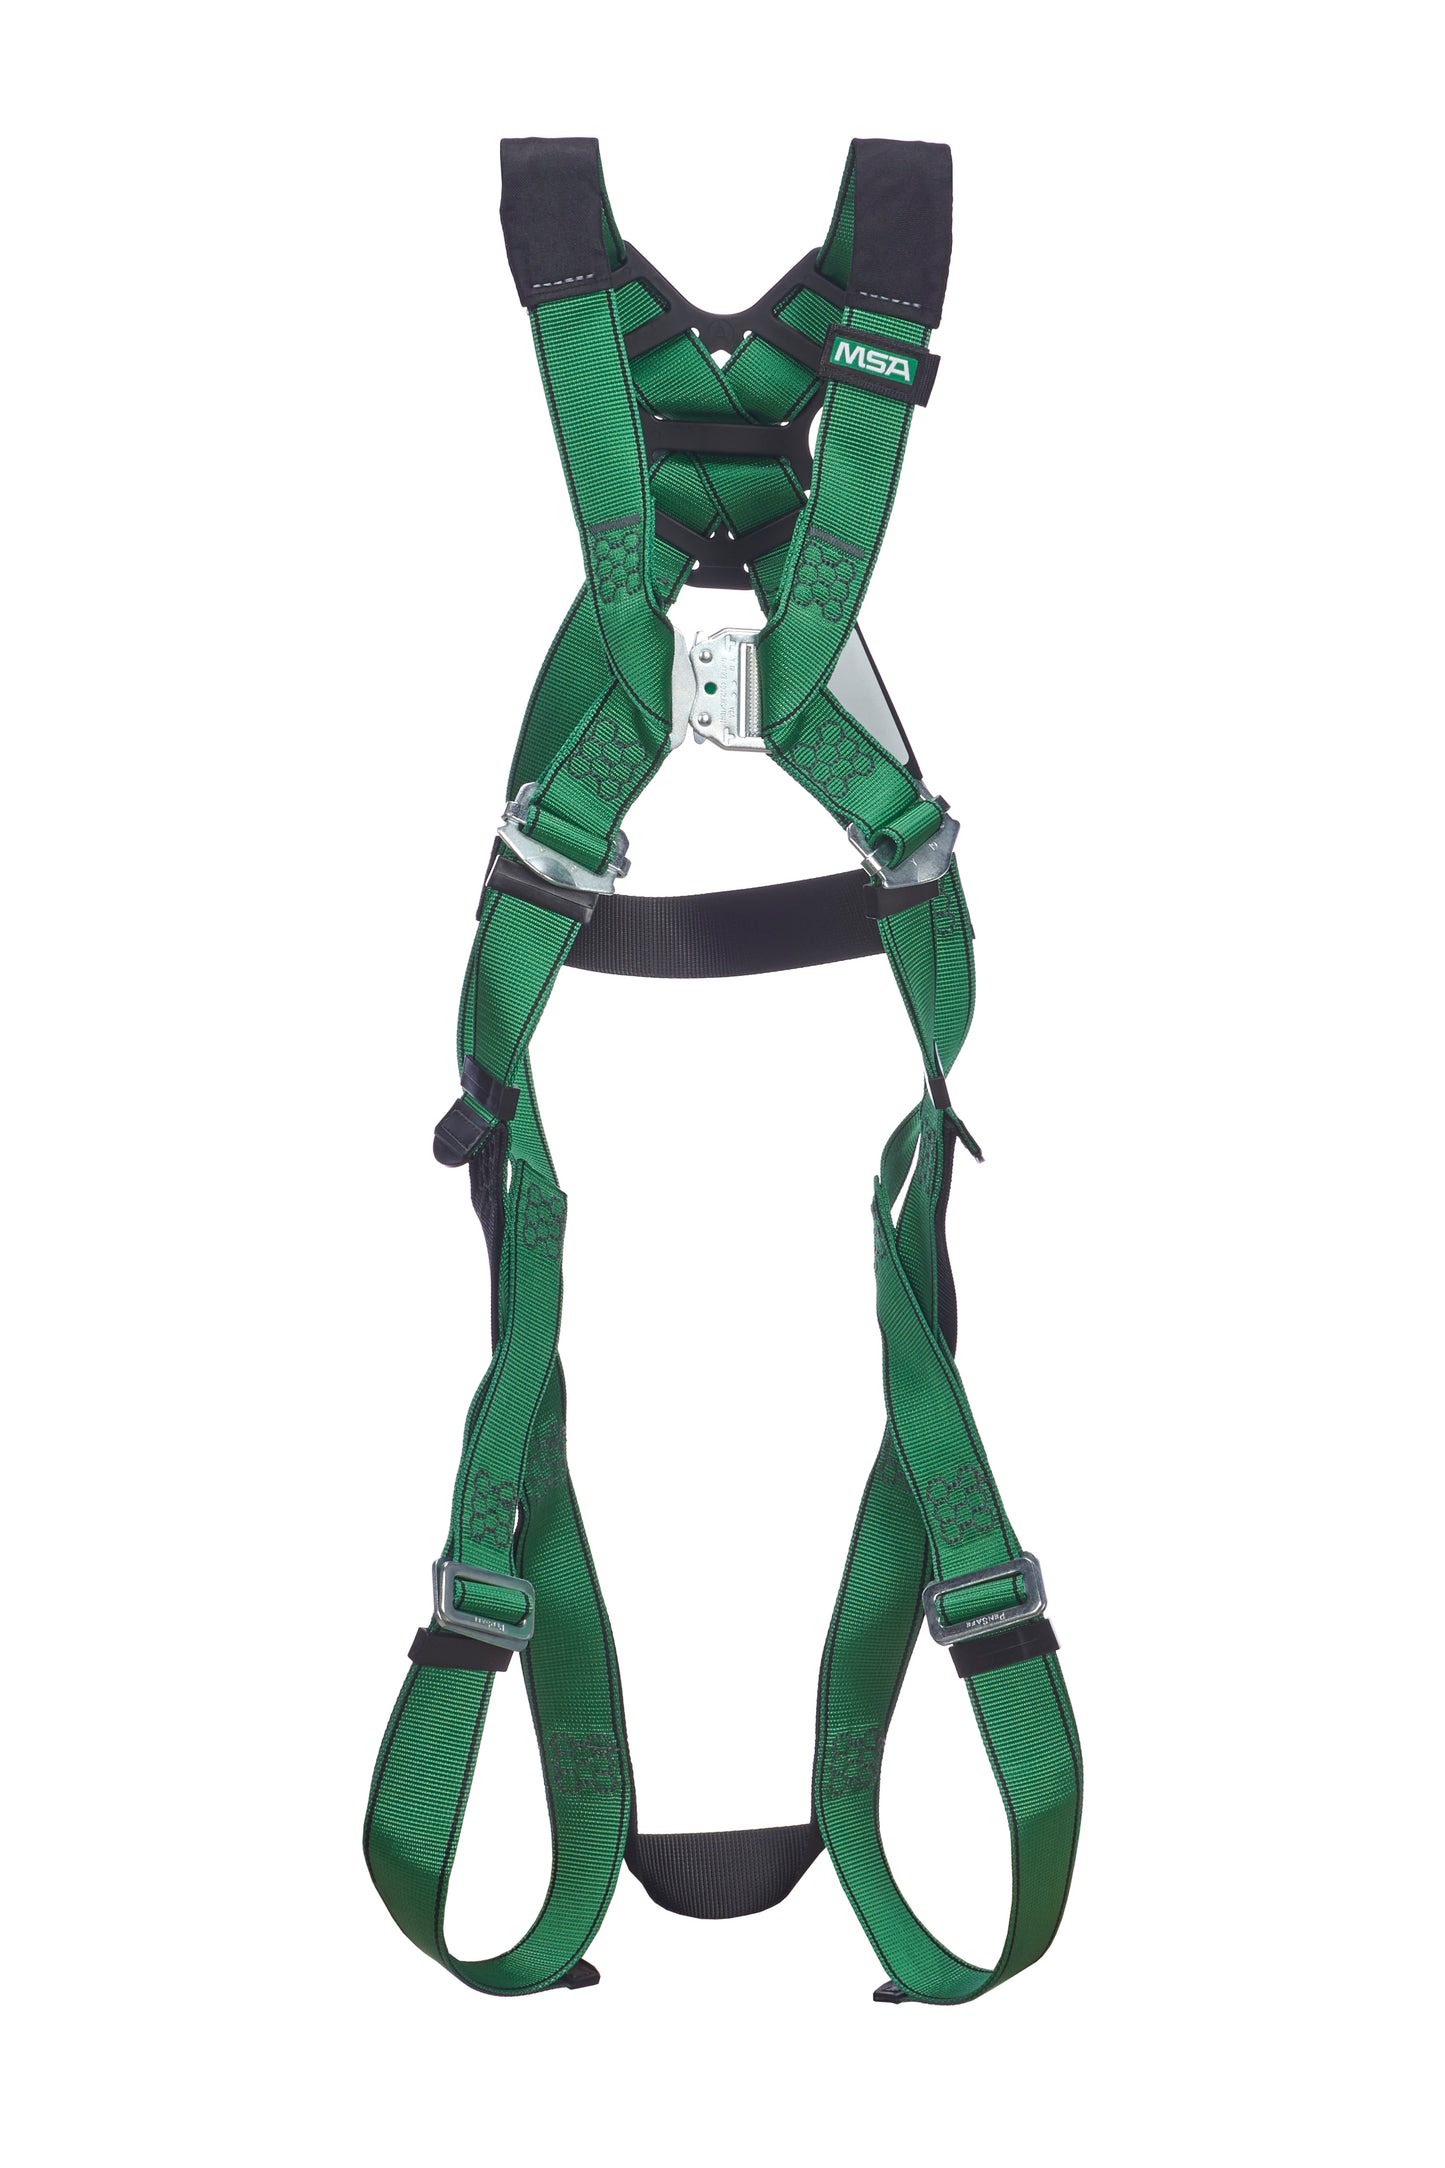 V-FORM Harness, Super Extra Large, Back D-Ring, Qwik-Fit Leg Straps, Quick Connect Chest Buckle